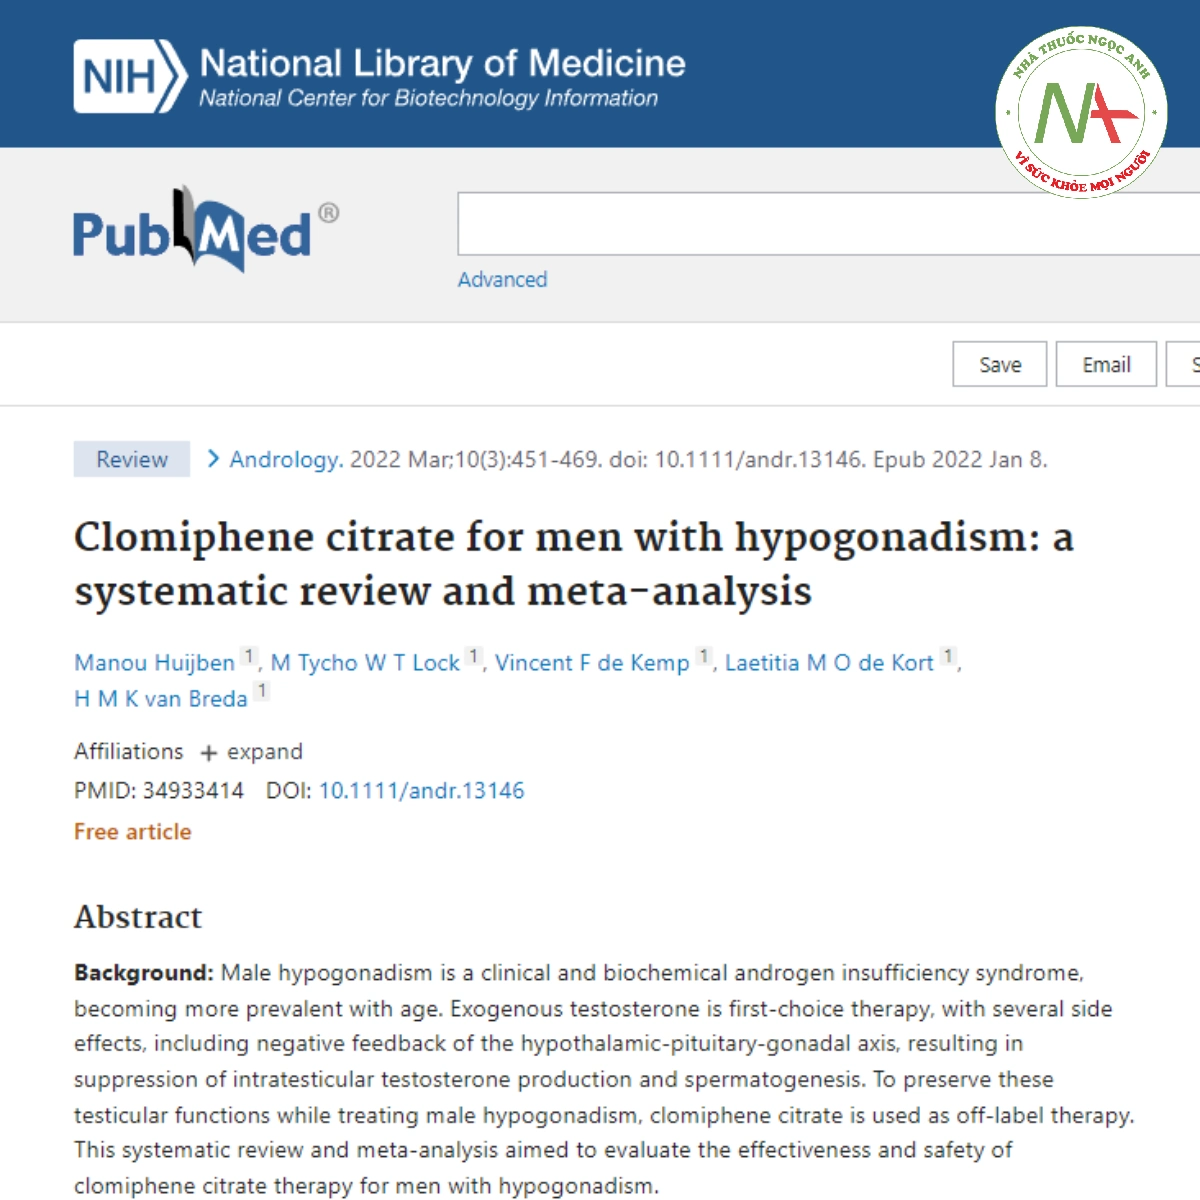 Clomiphene citrate for men with hypogonadism: a systematic review and meta-analysis